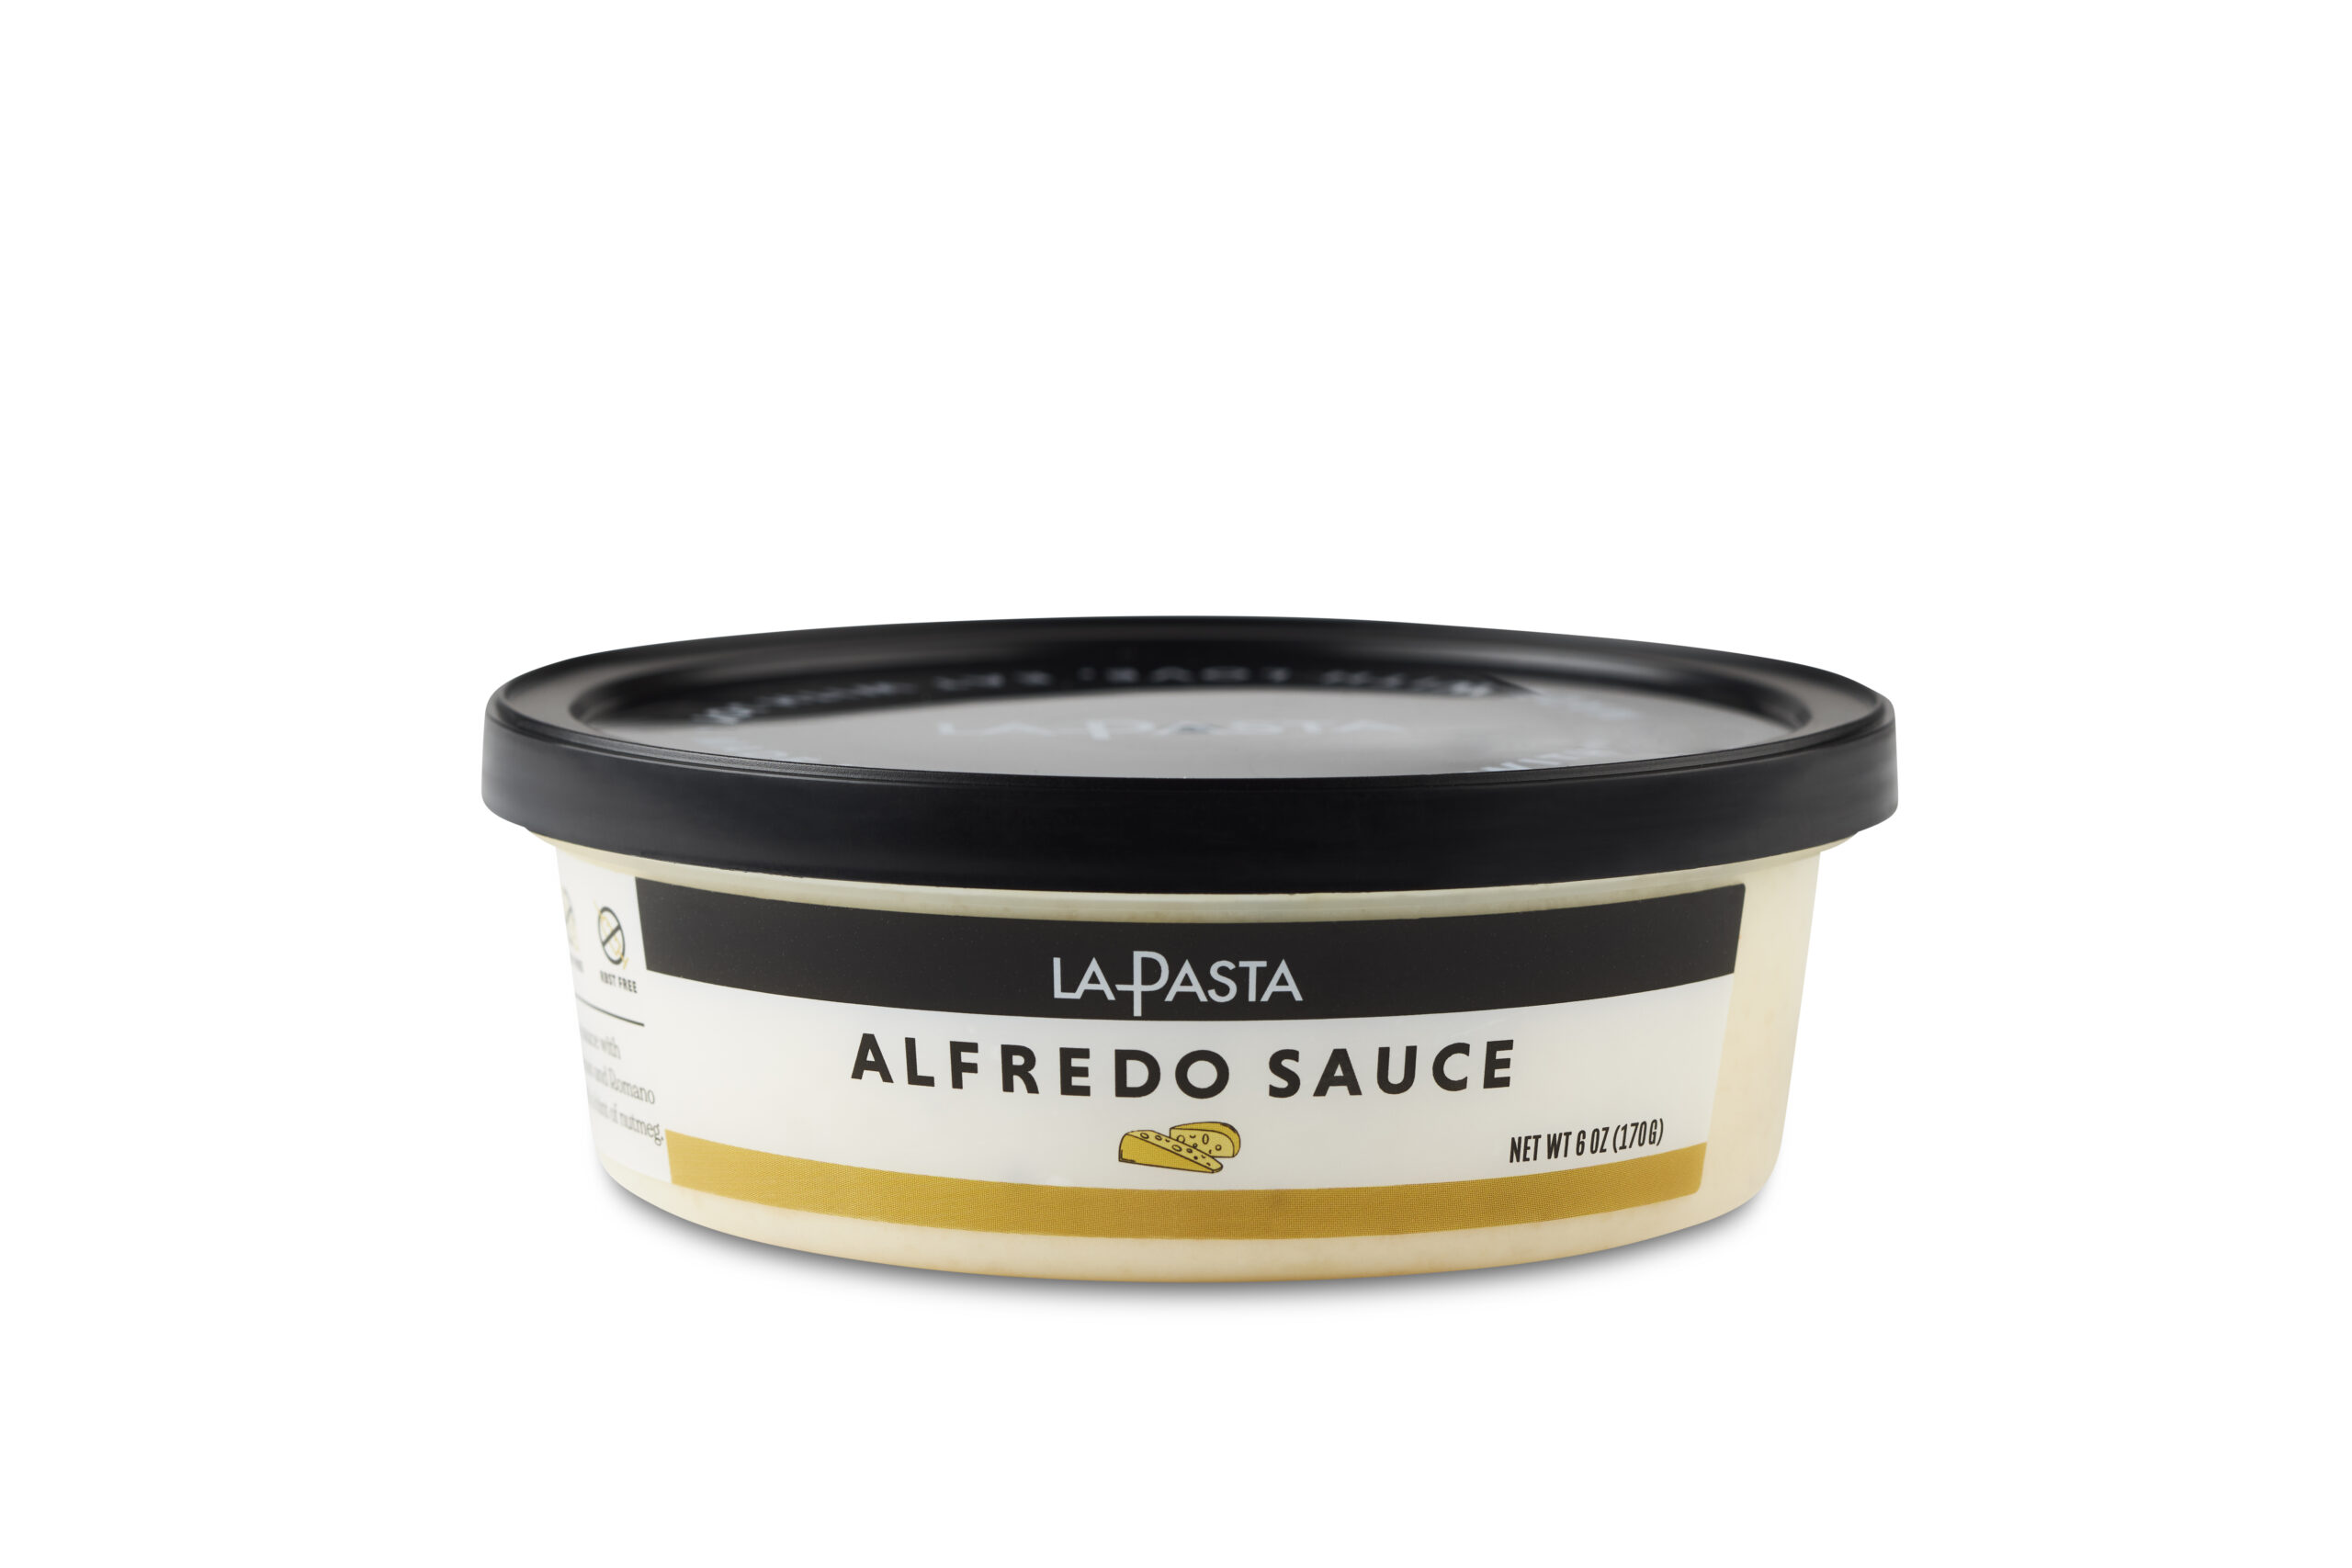 A container of alfredo sauce with black lid.